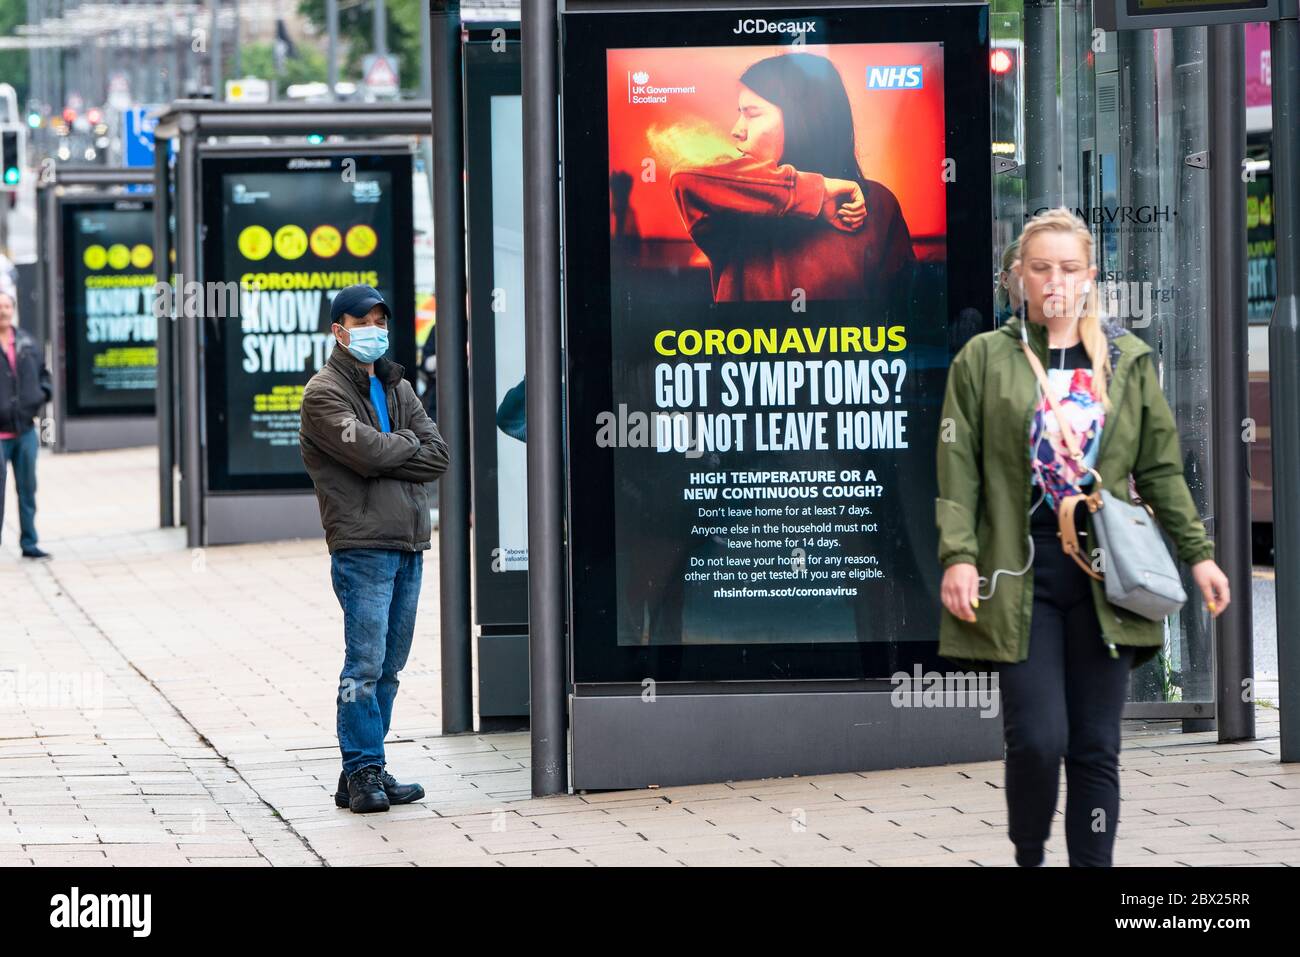 Edinburgh, Scotland, UK. 4 June 2020.  As Covid-19 lockdown relaxation continues in Scotland very few shops and businesses are open. Streets remain quiet and pubs and, with a few exceptions, bars and pubs are closed. Pictured; Coronavirus warning messages at bus stops on Princes Street. Iain Masterton/Alamy Live News Stock Photo